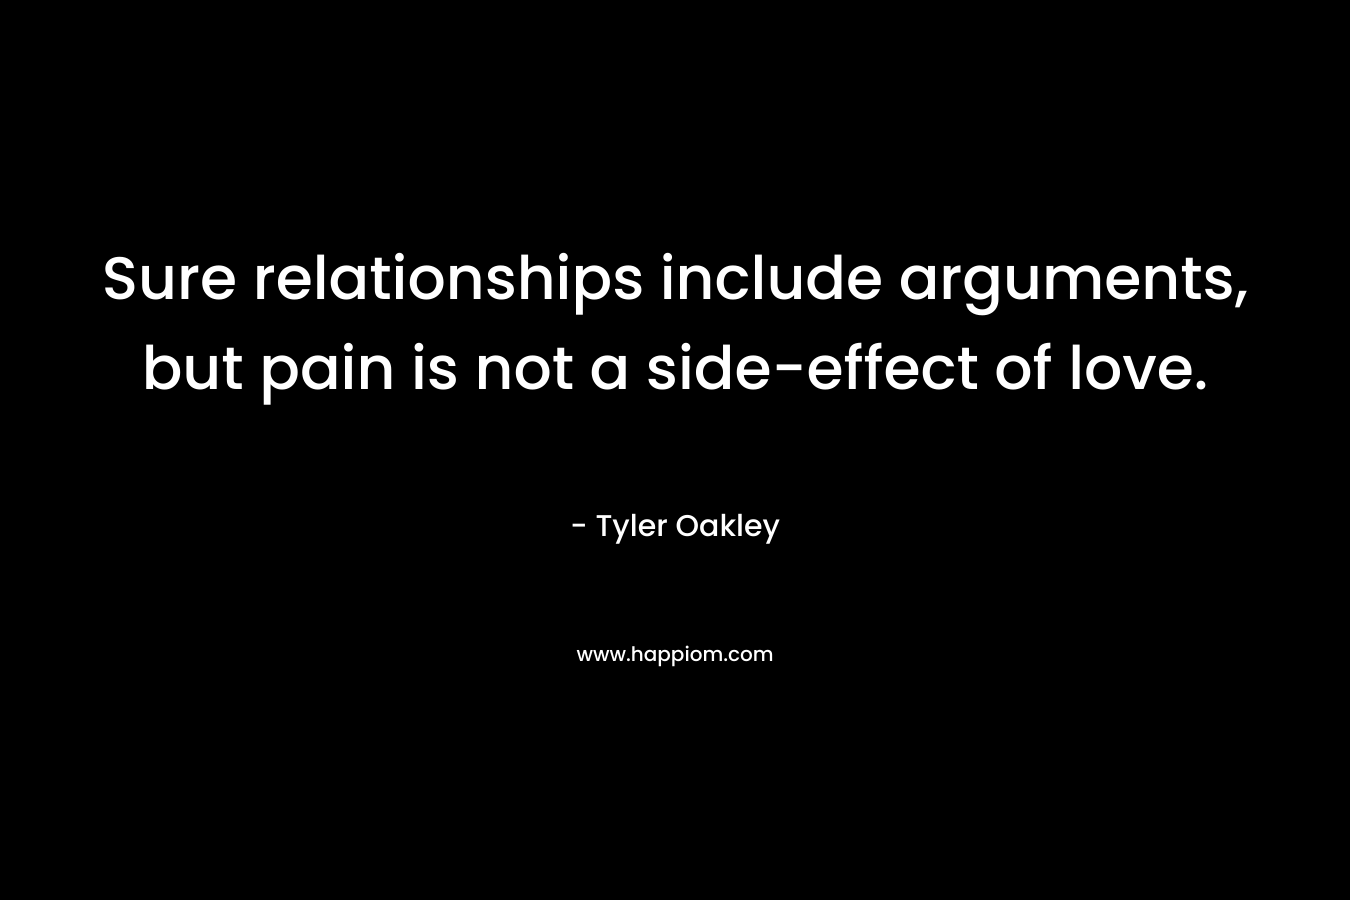 Sure relationships include arguments, but pain is not a side-effect of love. – Tyler Oakley